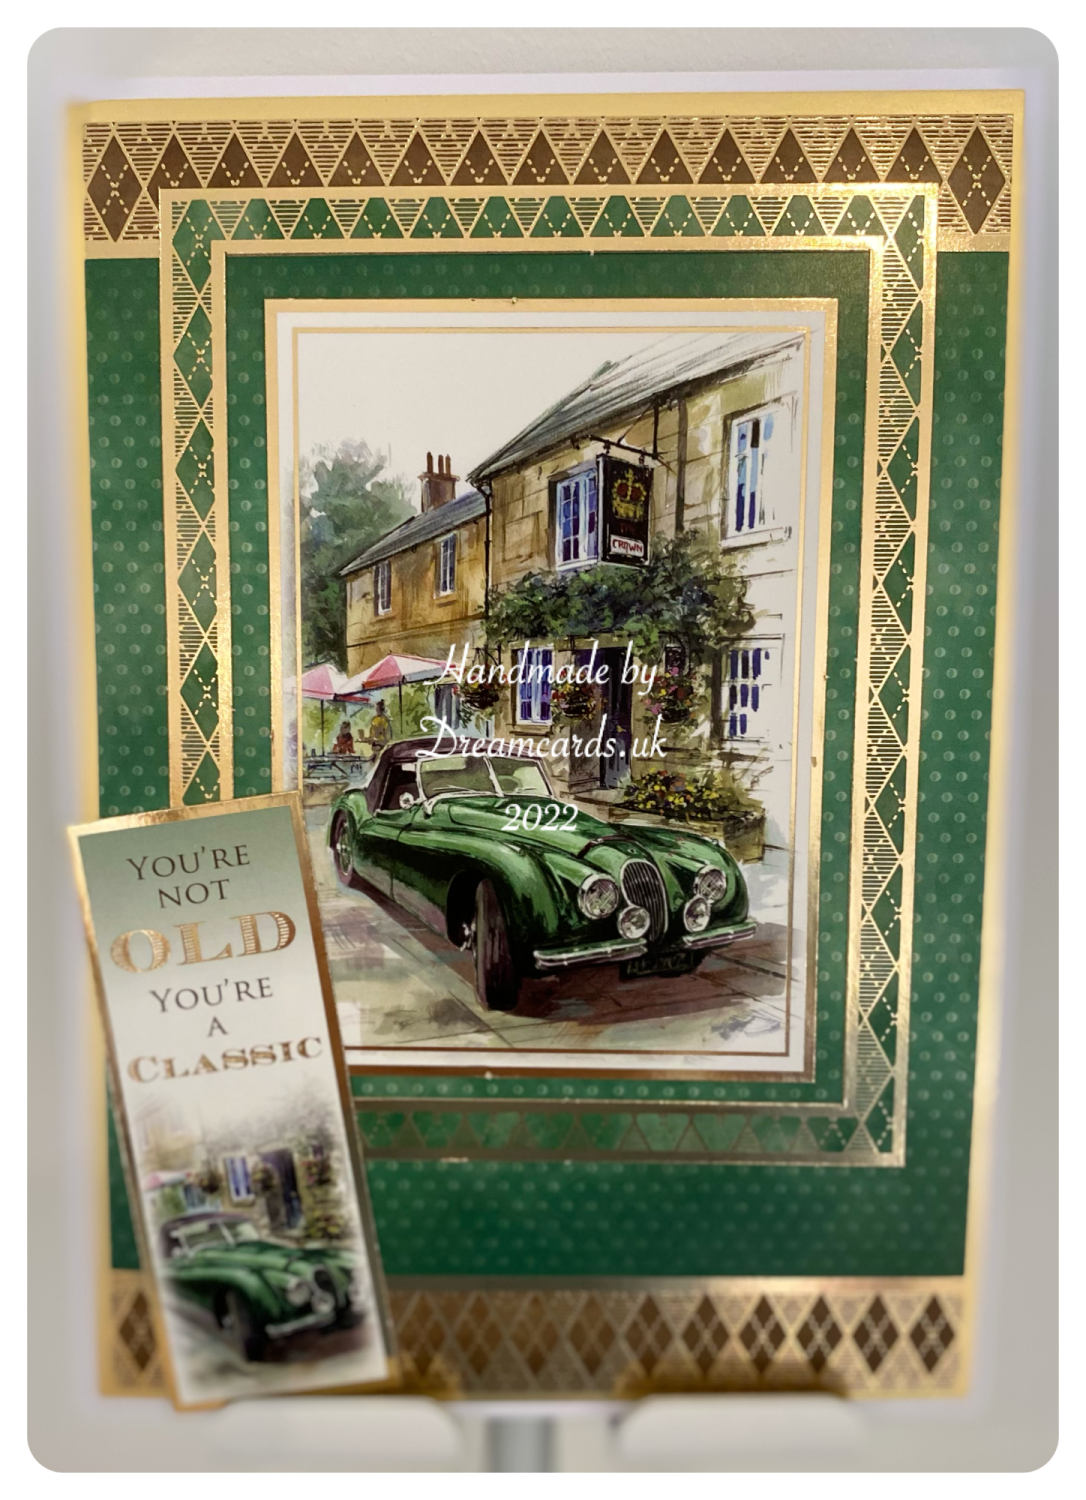 New Product A5 Vintage car card - You're Not Old You're a classic.